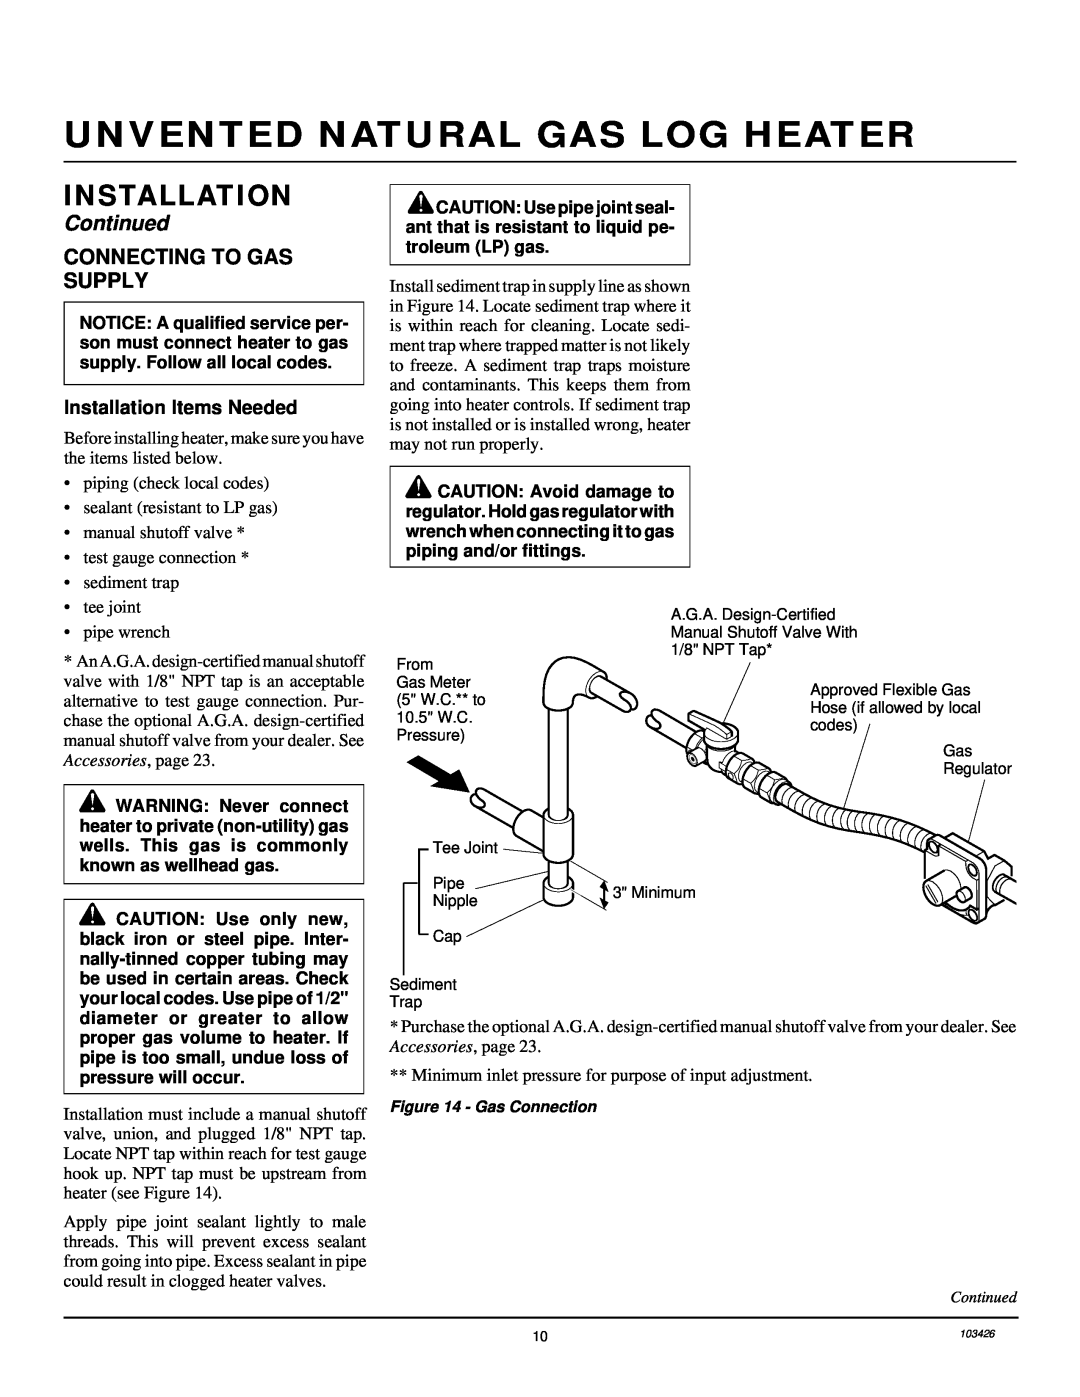 Desa 103426-01 installation manual Connecting To Gas Supply, Unvented Natural Gas Log Heater, Installation, Continued 